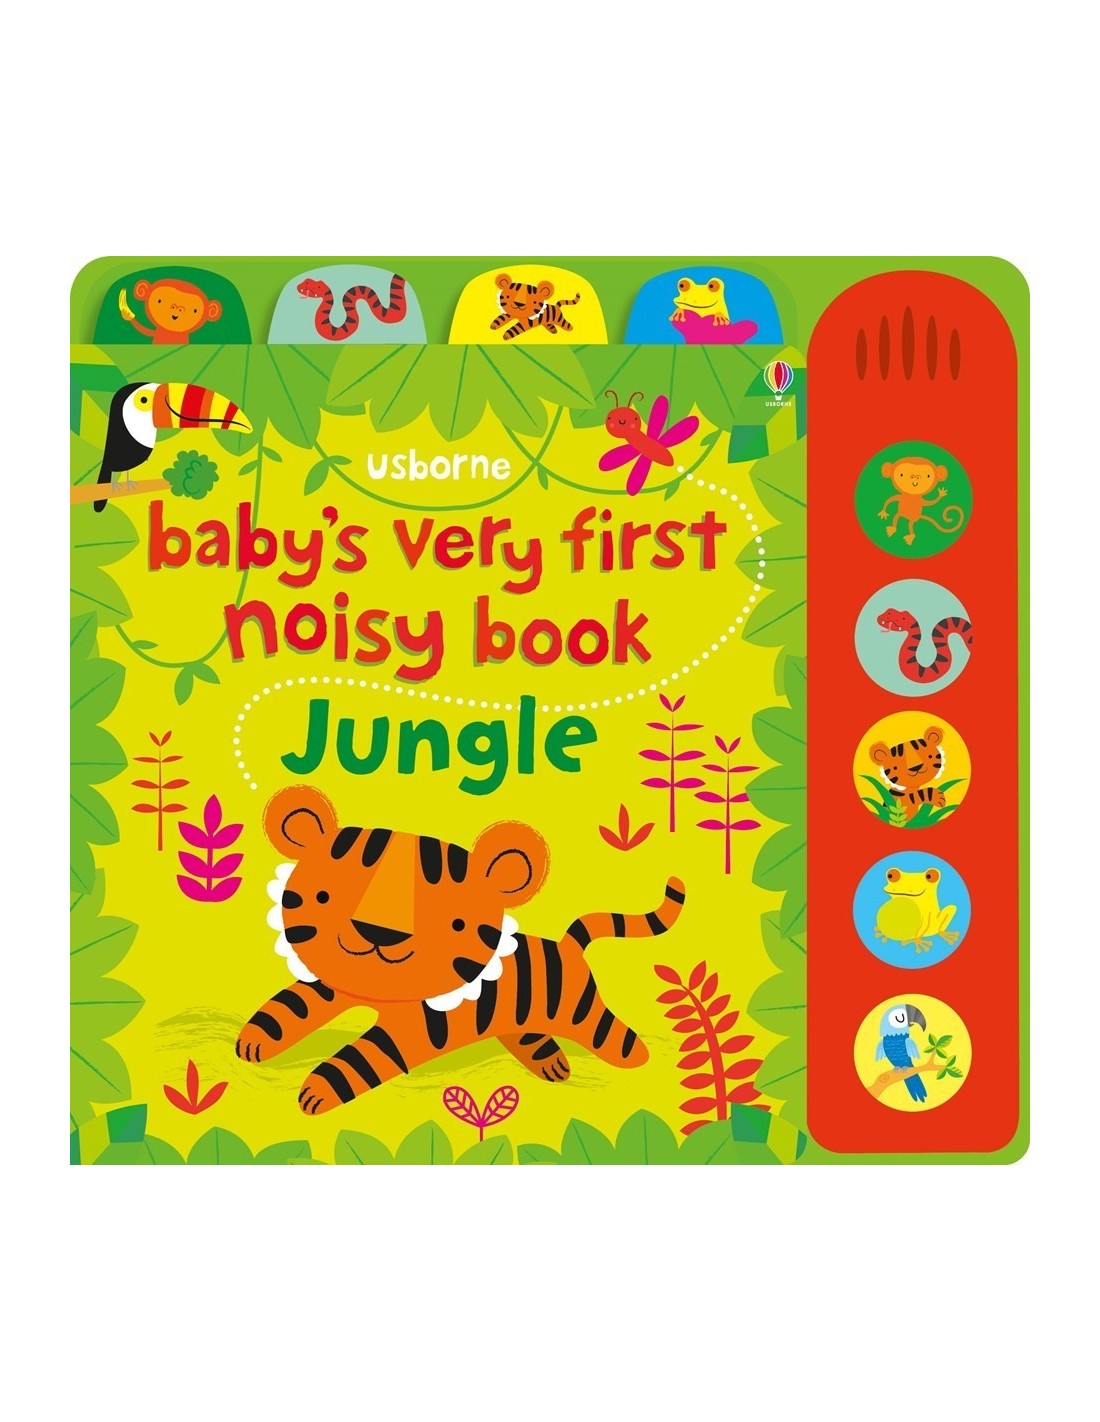 Baby's very first noisy book: Jungle